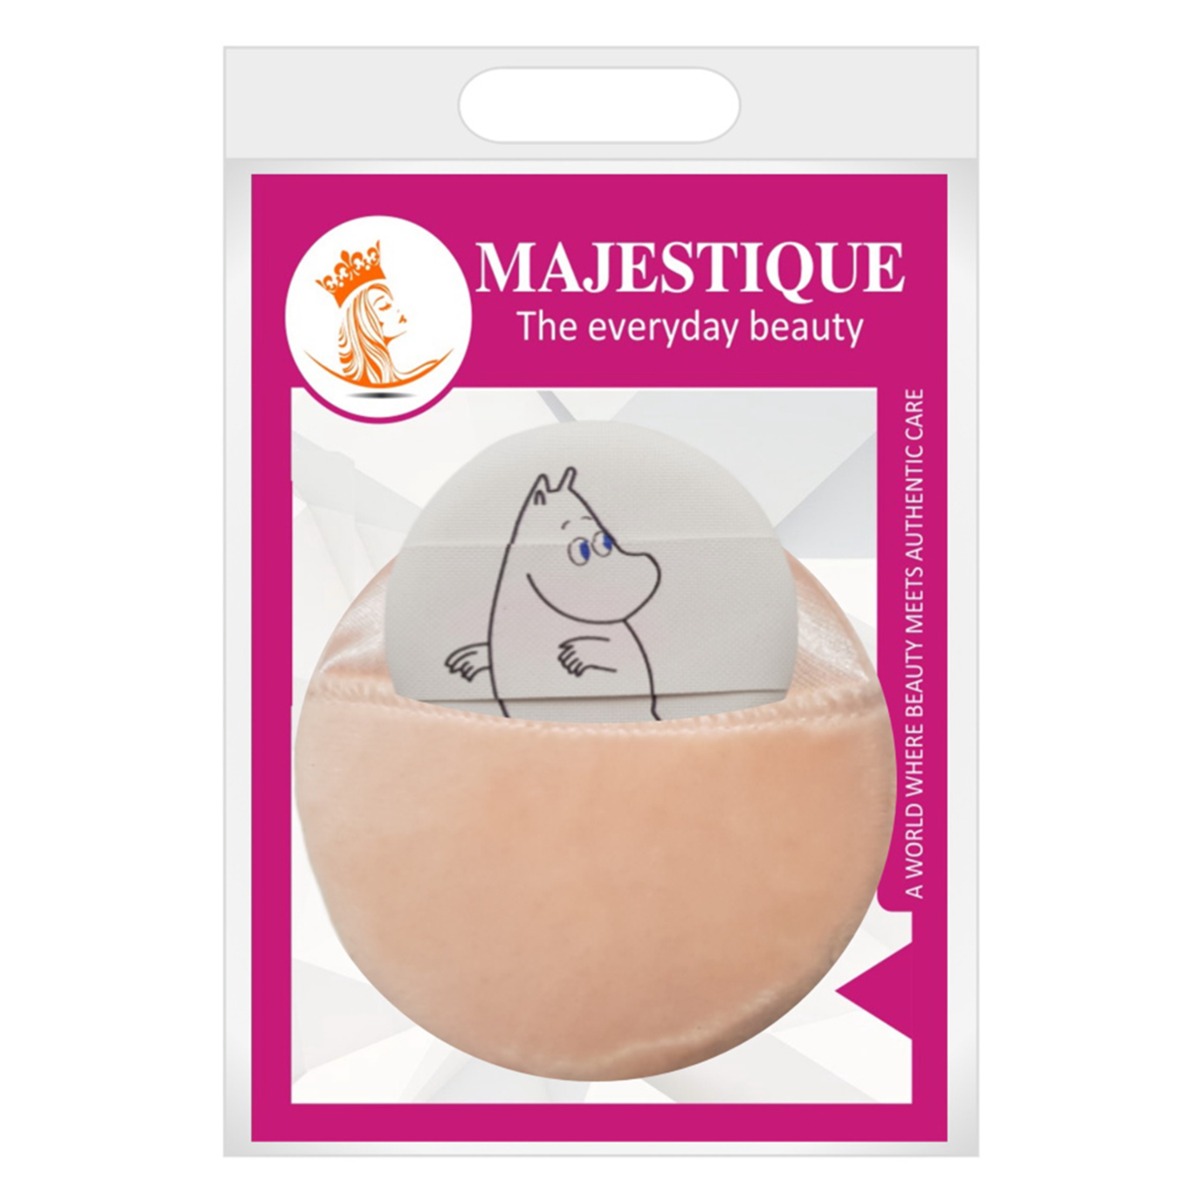 Majestique Reusable Makeup Removal Pads, Pack of 2